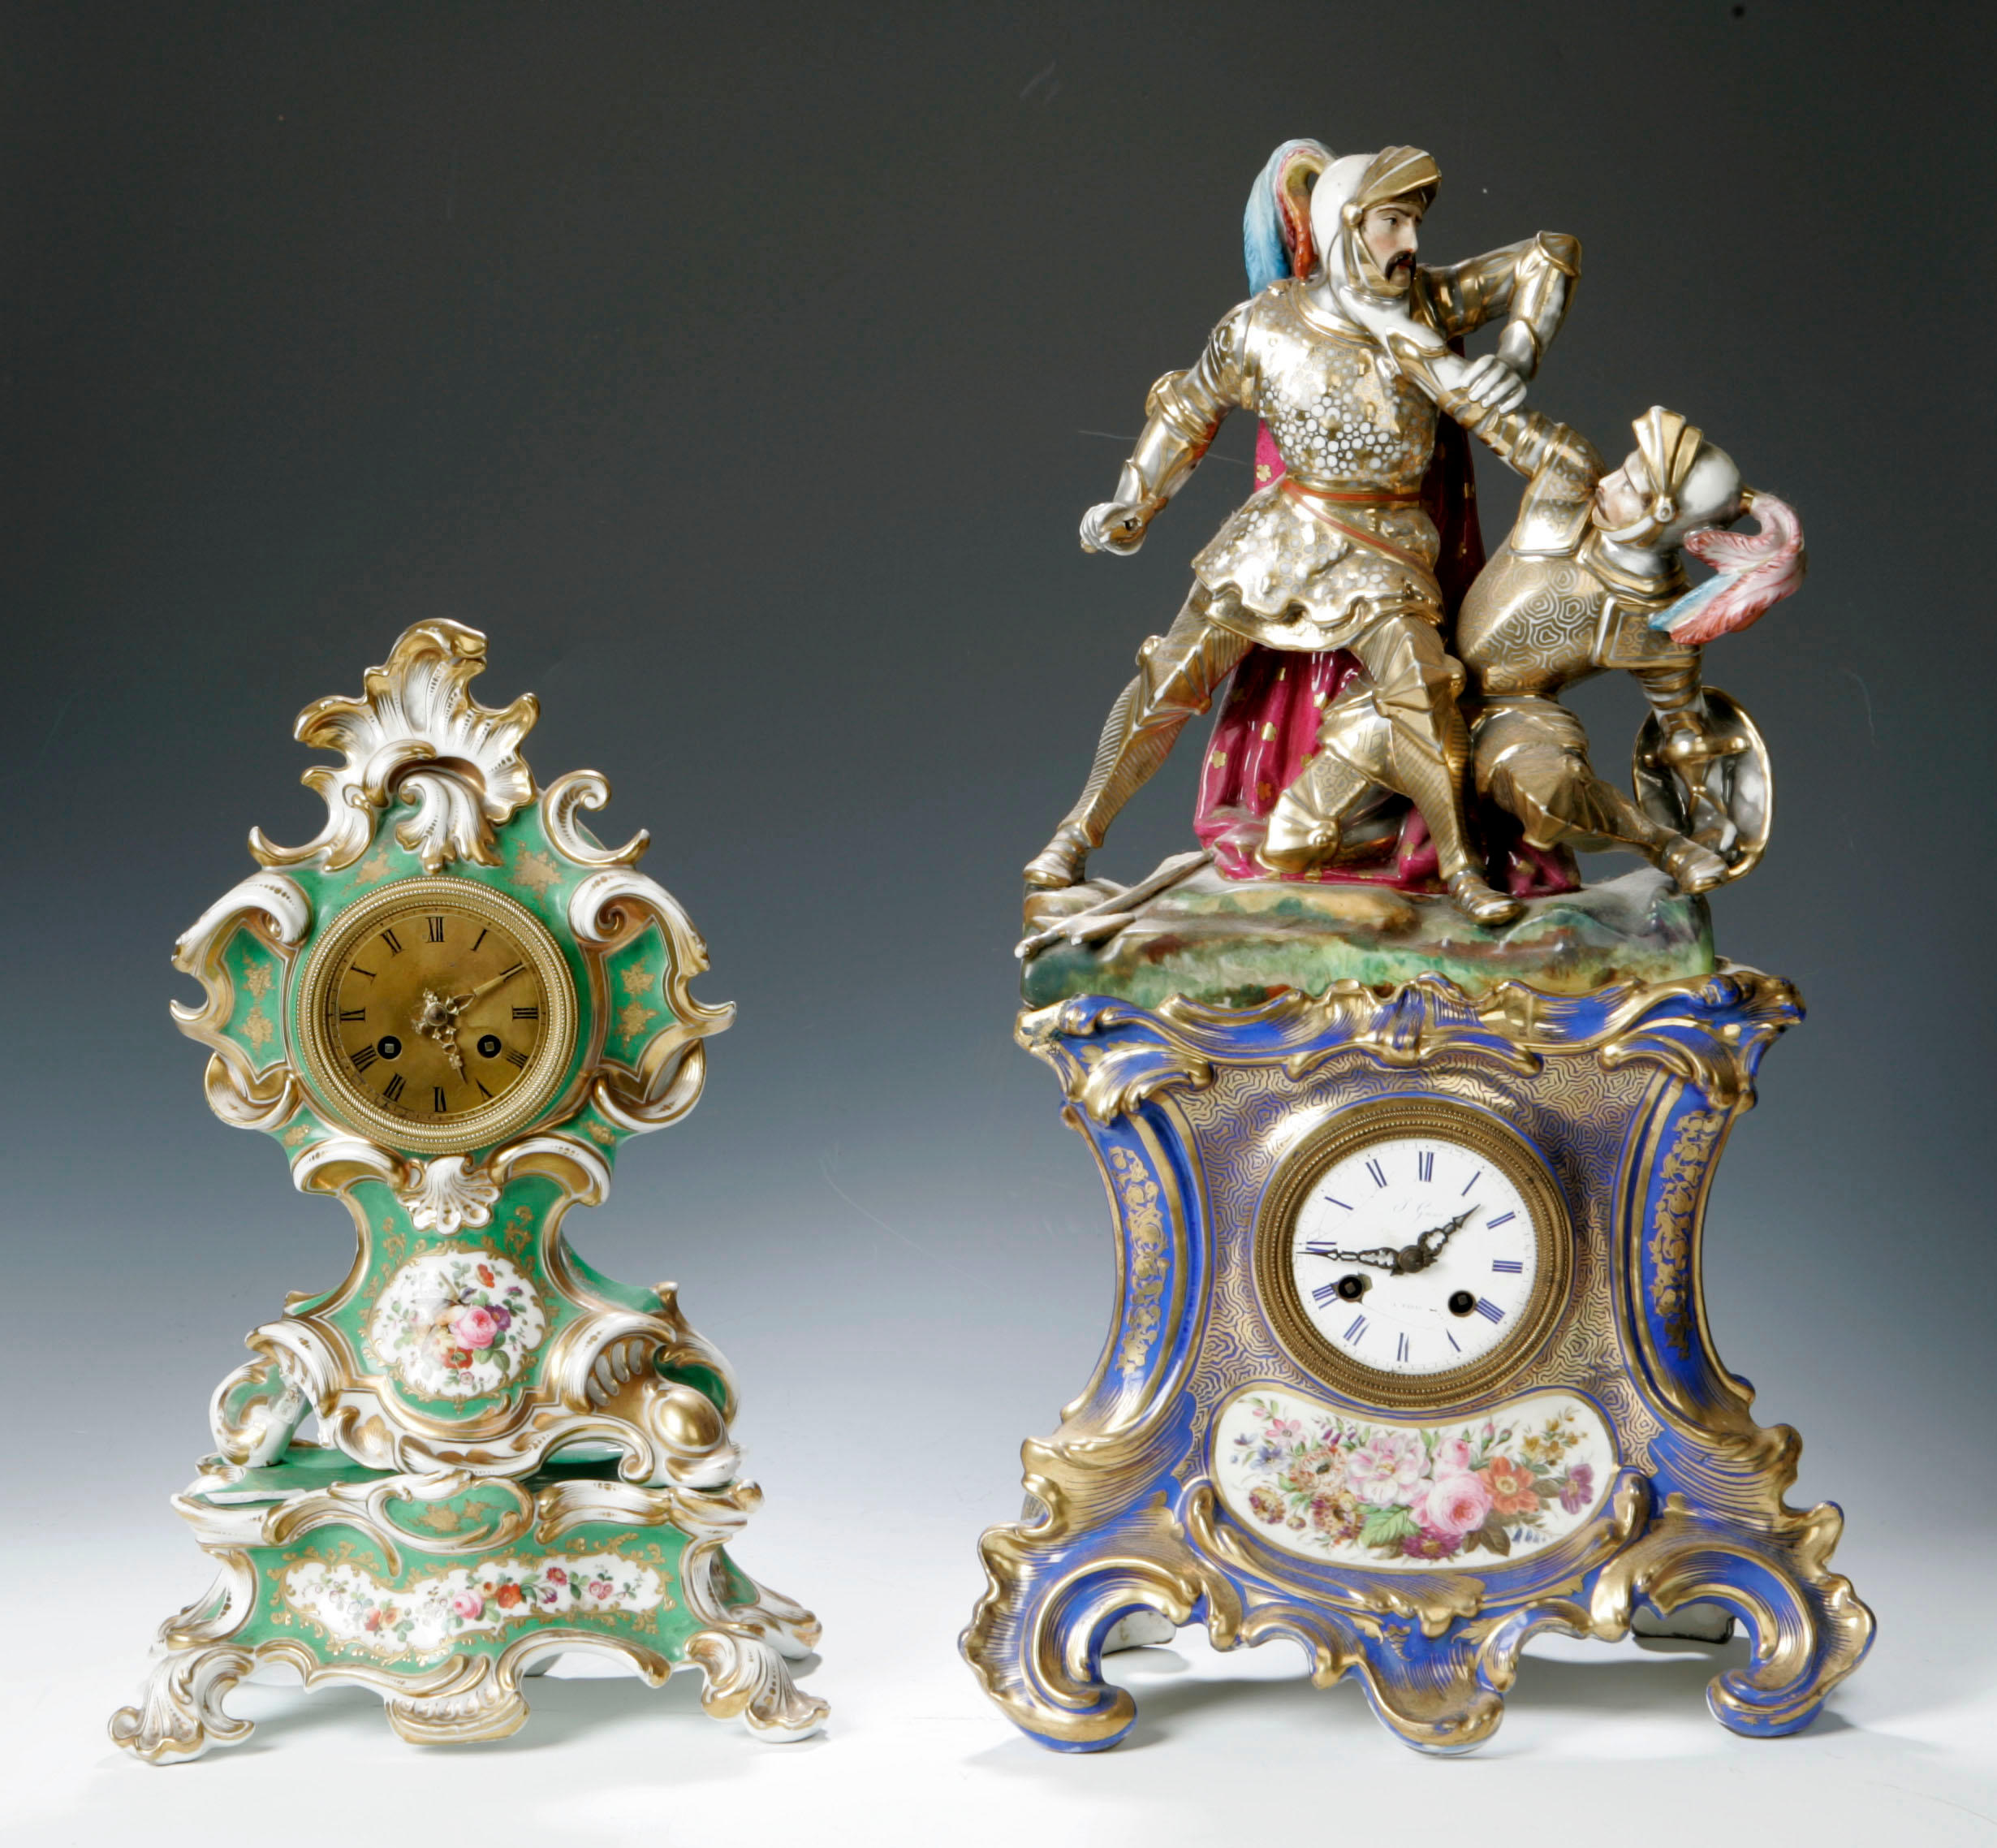 A 19th century French continental porcelain mantel clock